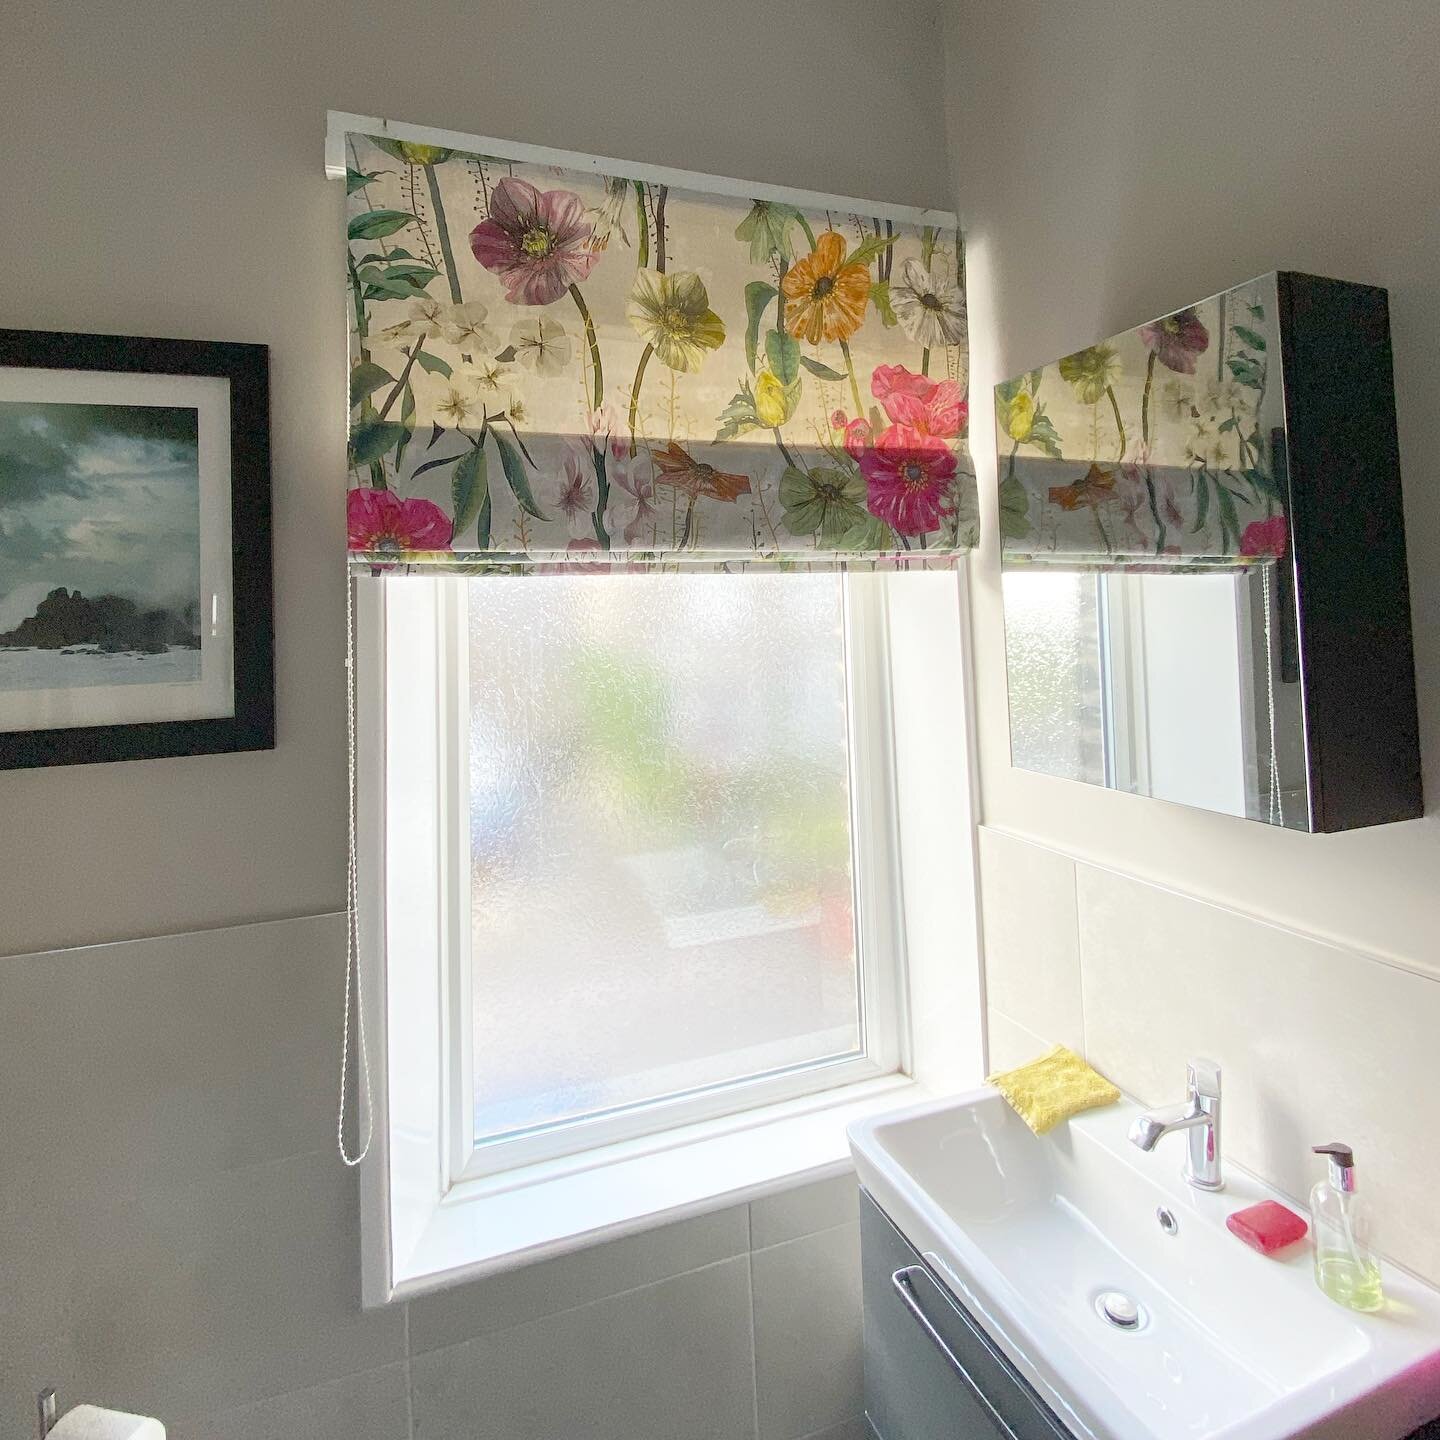 A bathroom roman blind. The customers own stunning fabric from @designersguild. On a mechanical track. #designerguildfabric #designerguild #fabric #floweryfabric #bathroomblind #curtainmaker #bespokeblind #romanblind #handmade #handmaderomanblind #ha